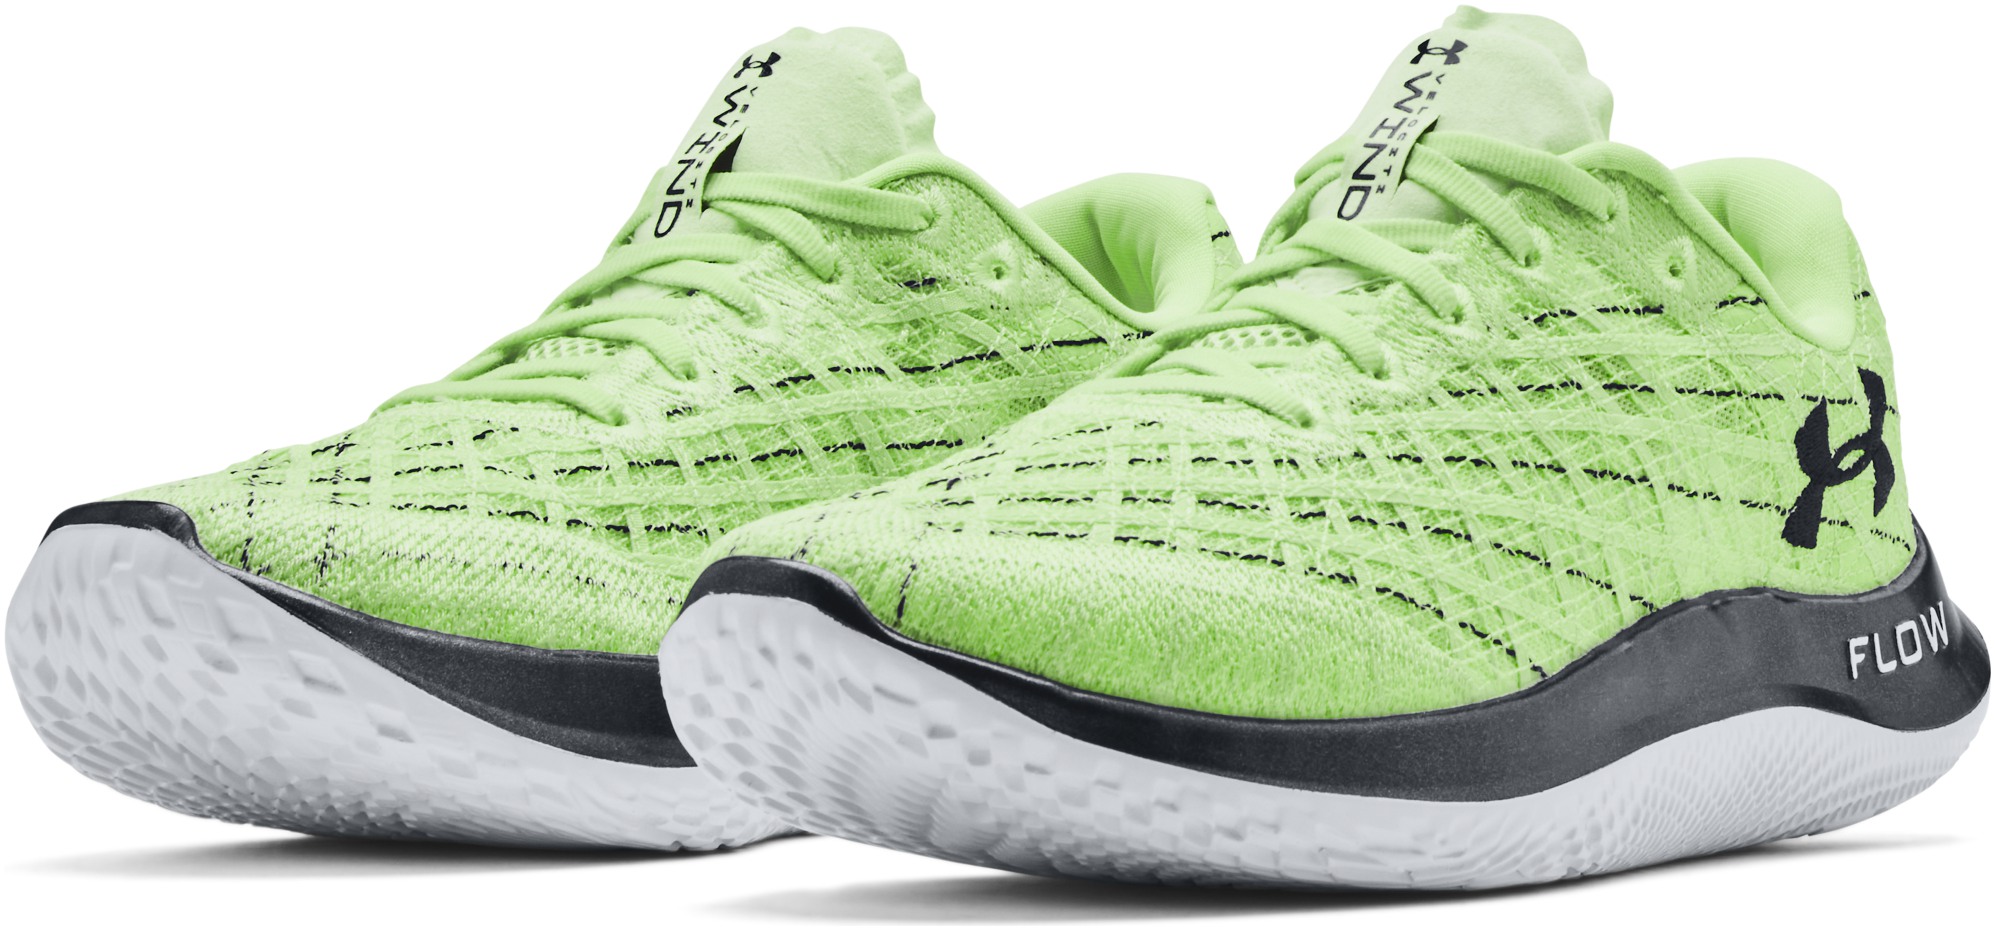 Mens running shoes Under Armour UA FLOW VELOCITI WIND green | AD Sport ...